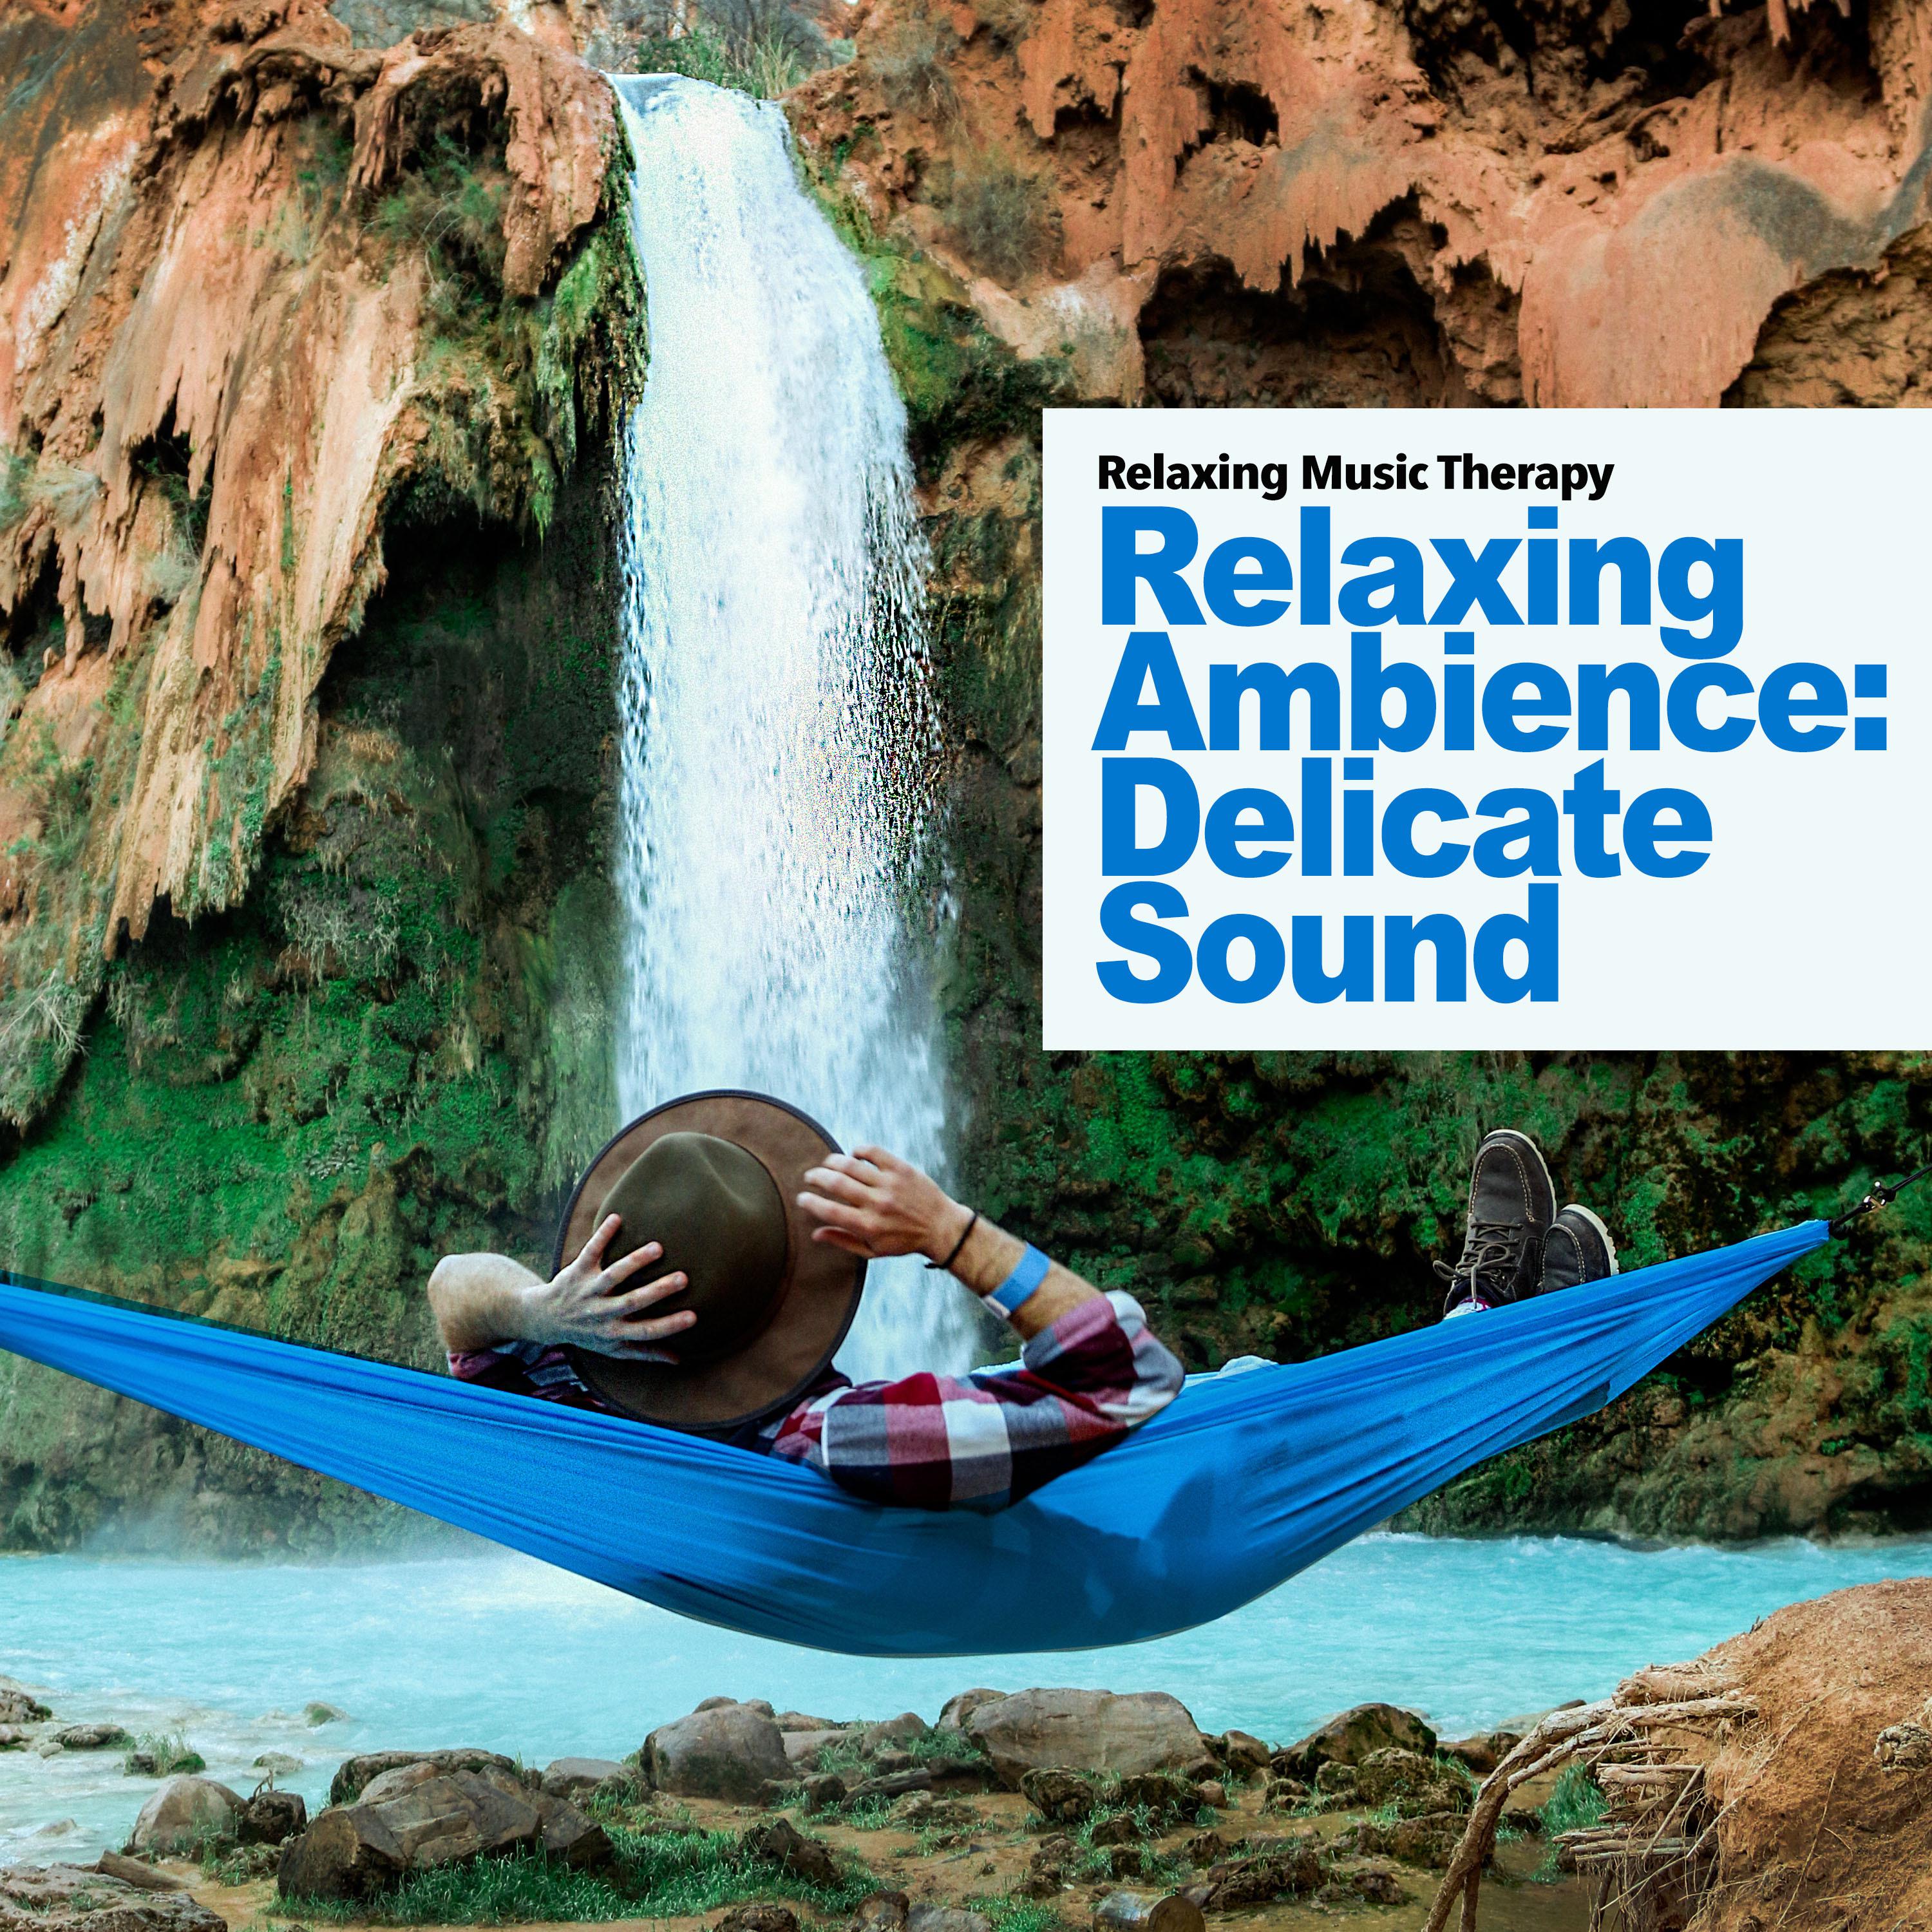 Relaxing Ambience: Delicate Sound